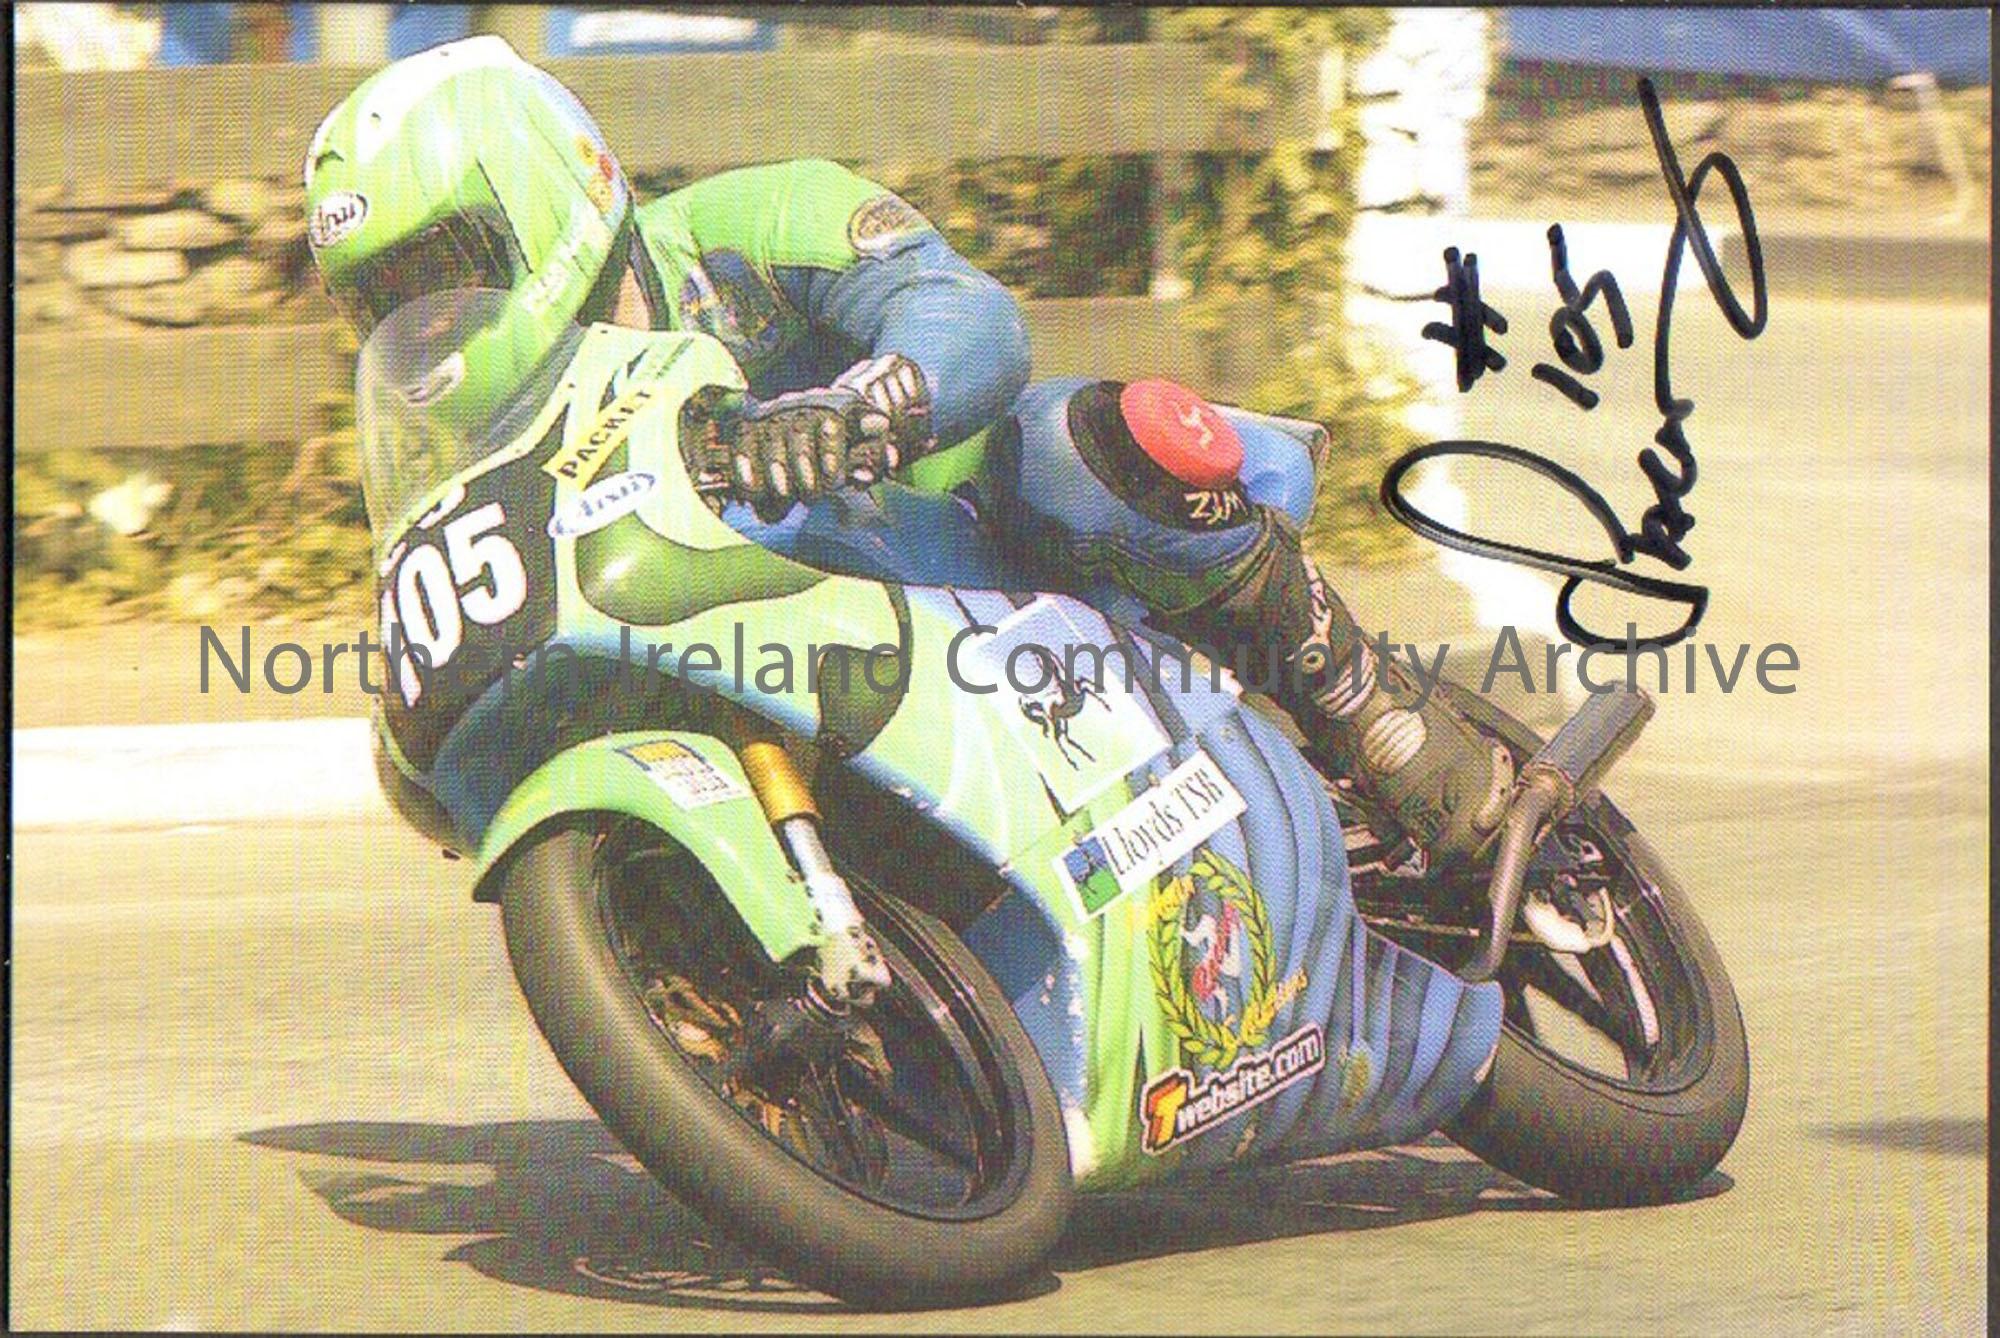 Signed photograph of Chris Palmer riding a blue and green motorbike with number 105 on the front and wearing blue and green leathers riding around a c…